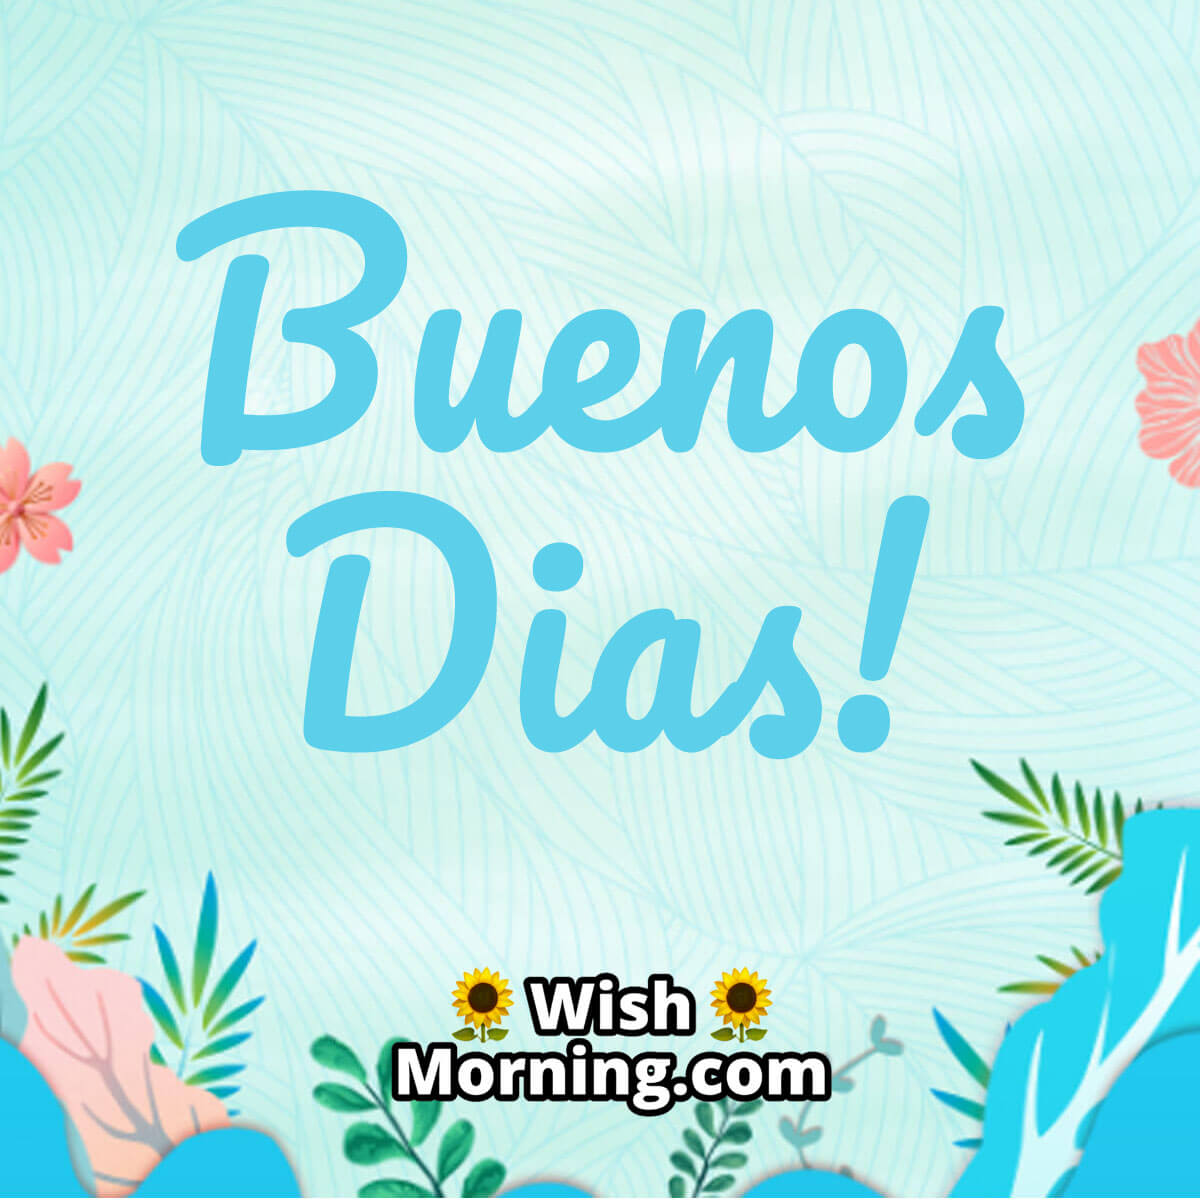 good morning quotes for him in spanish